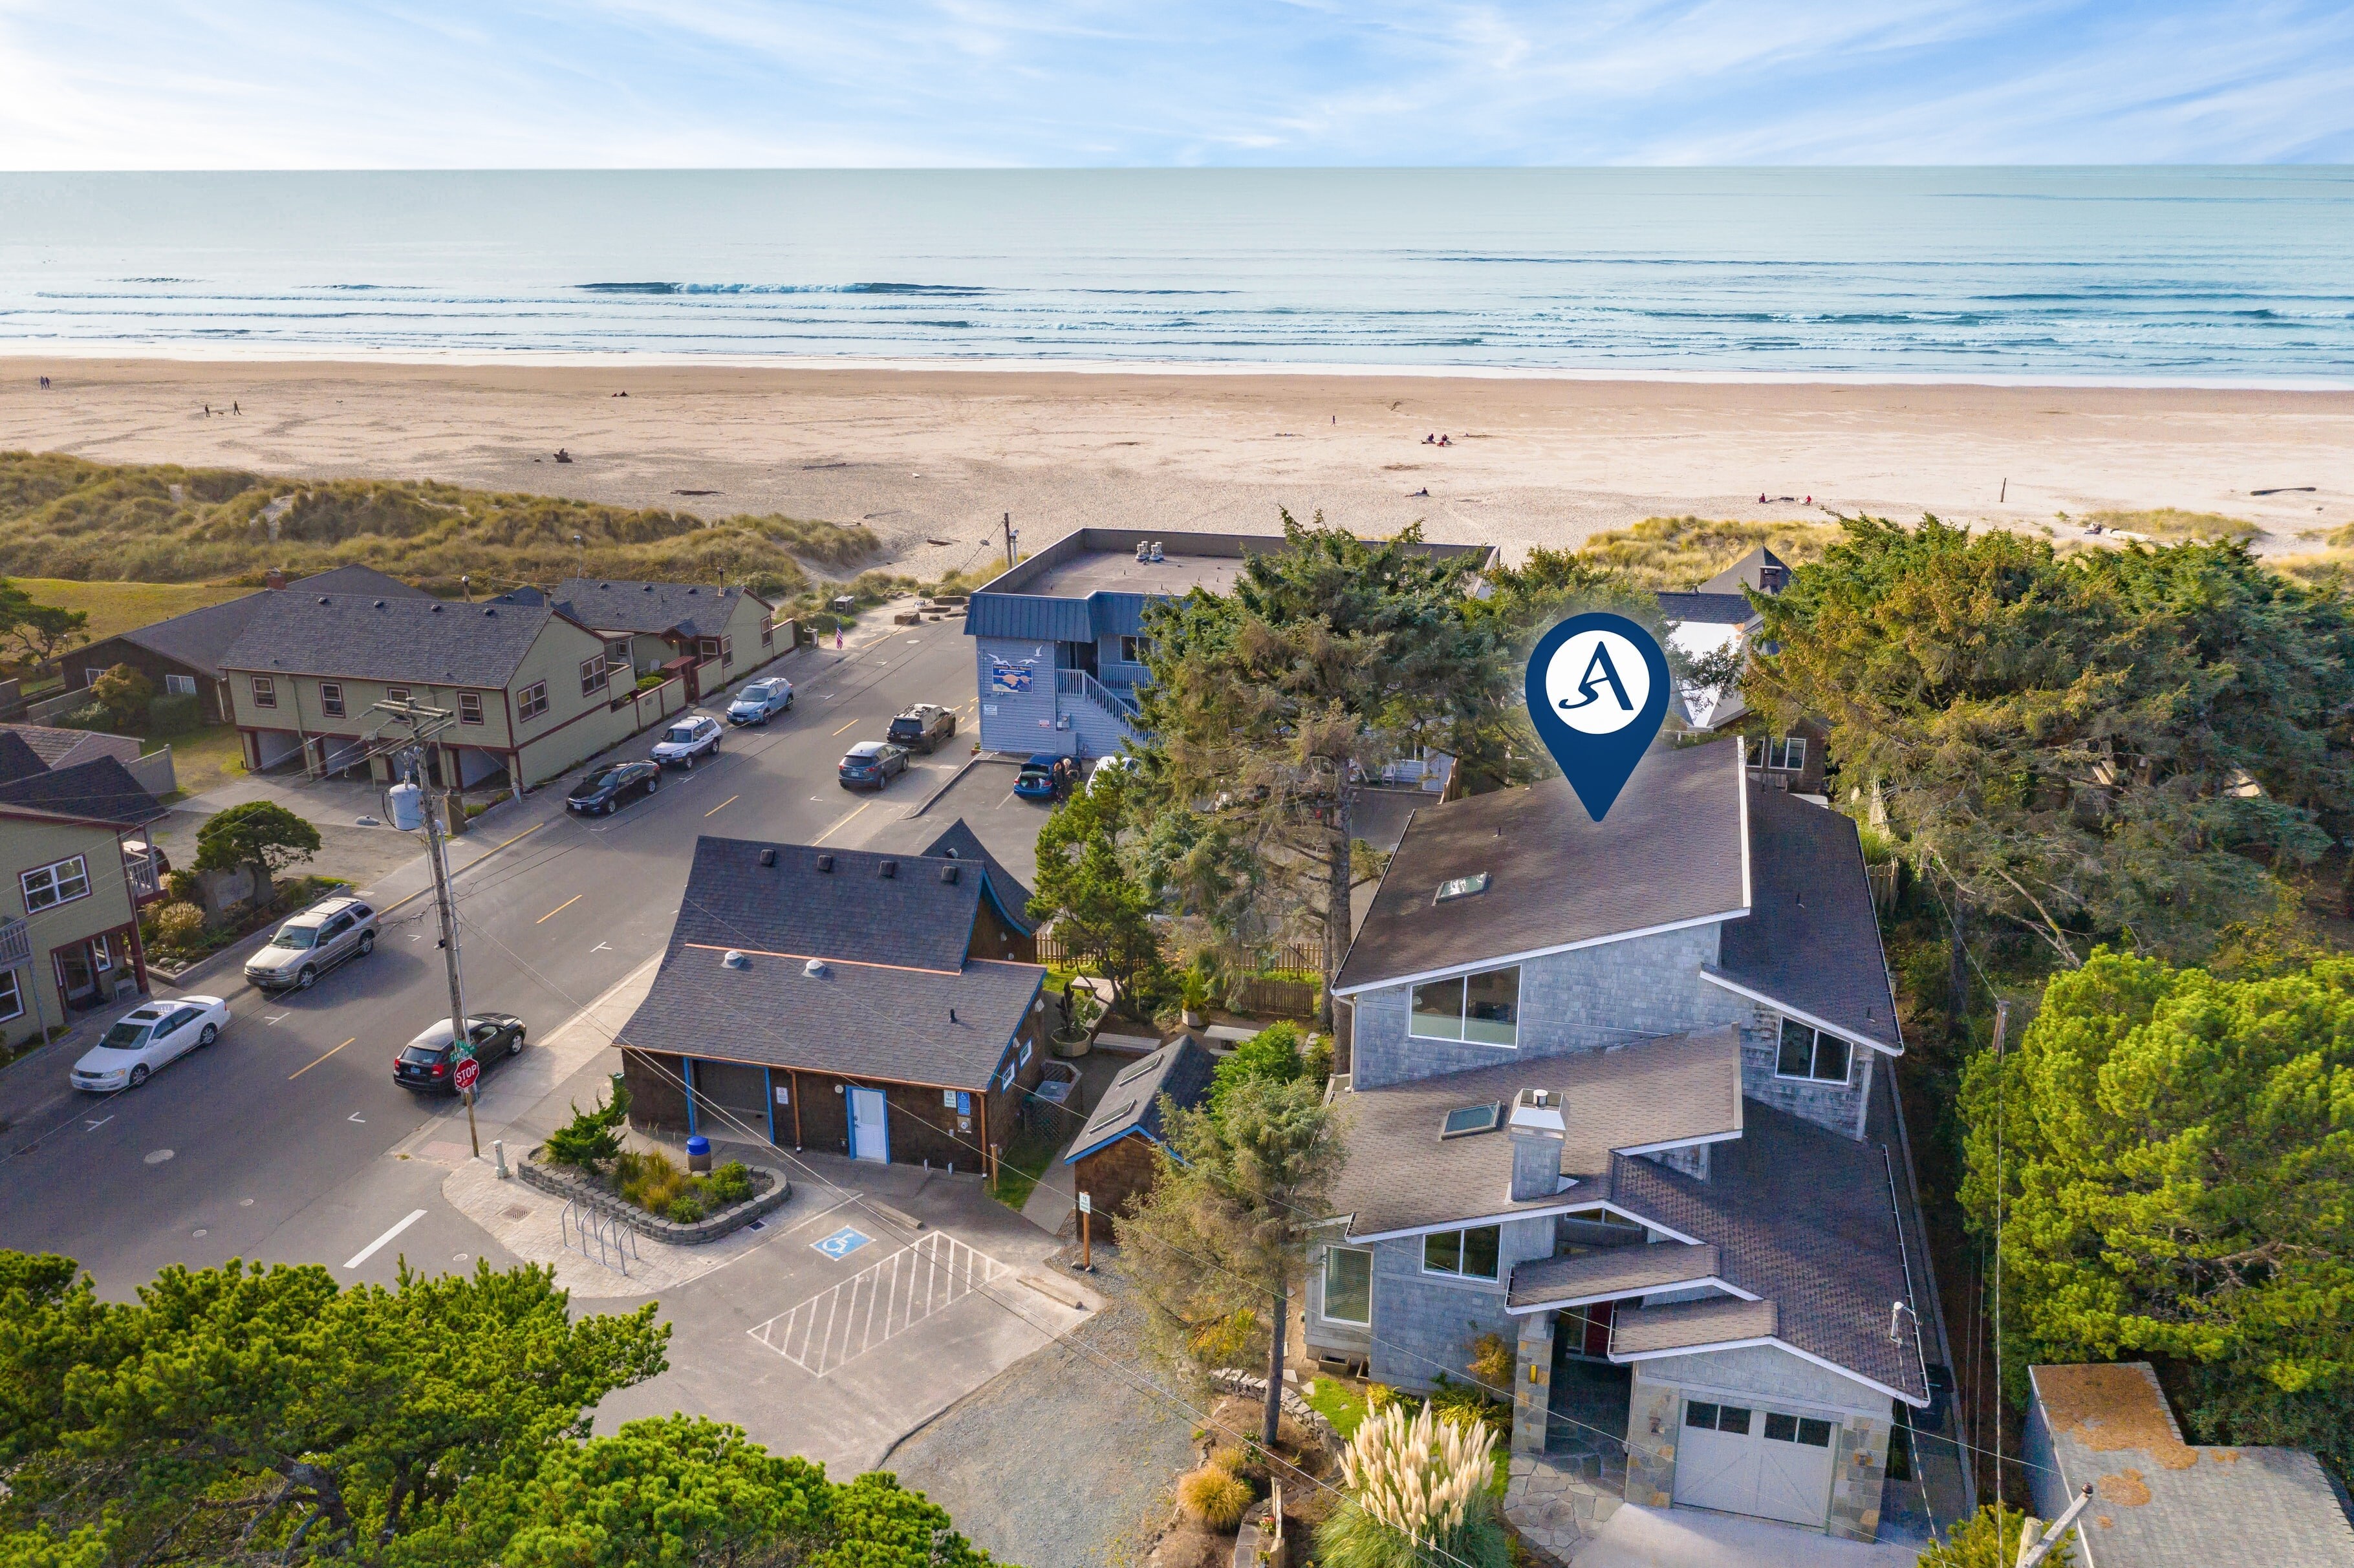 Villa Manzanita is just off Laneda Ave. and steps from the quaint downtown area and the beach.